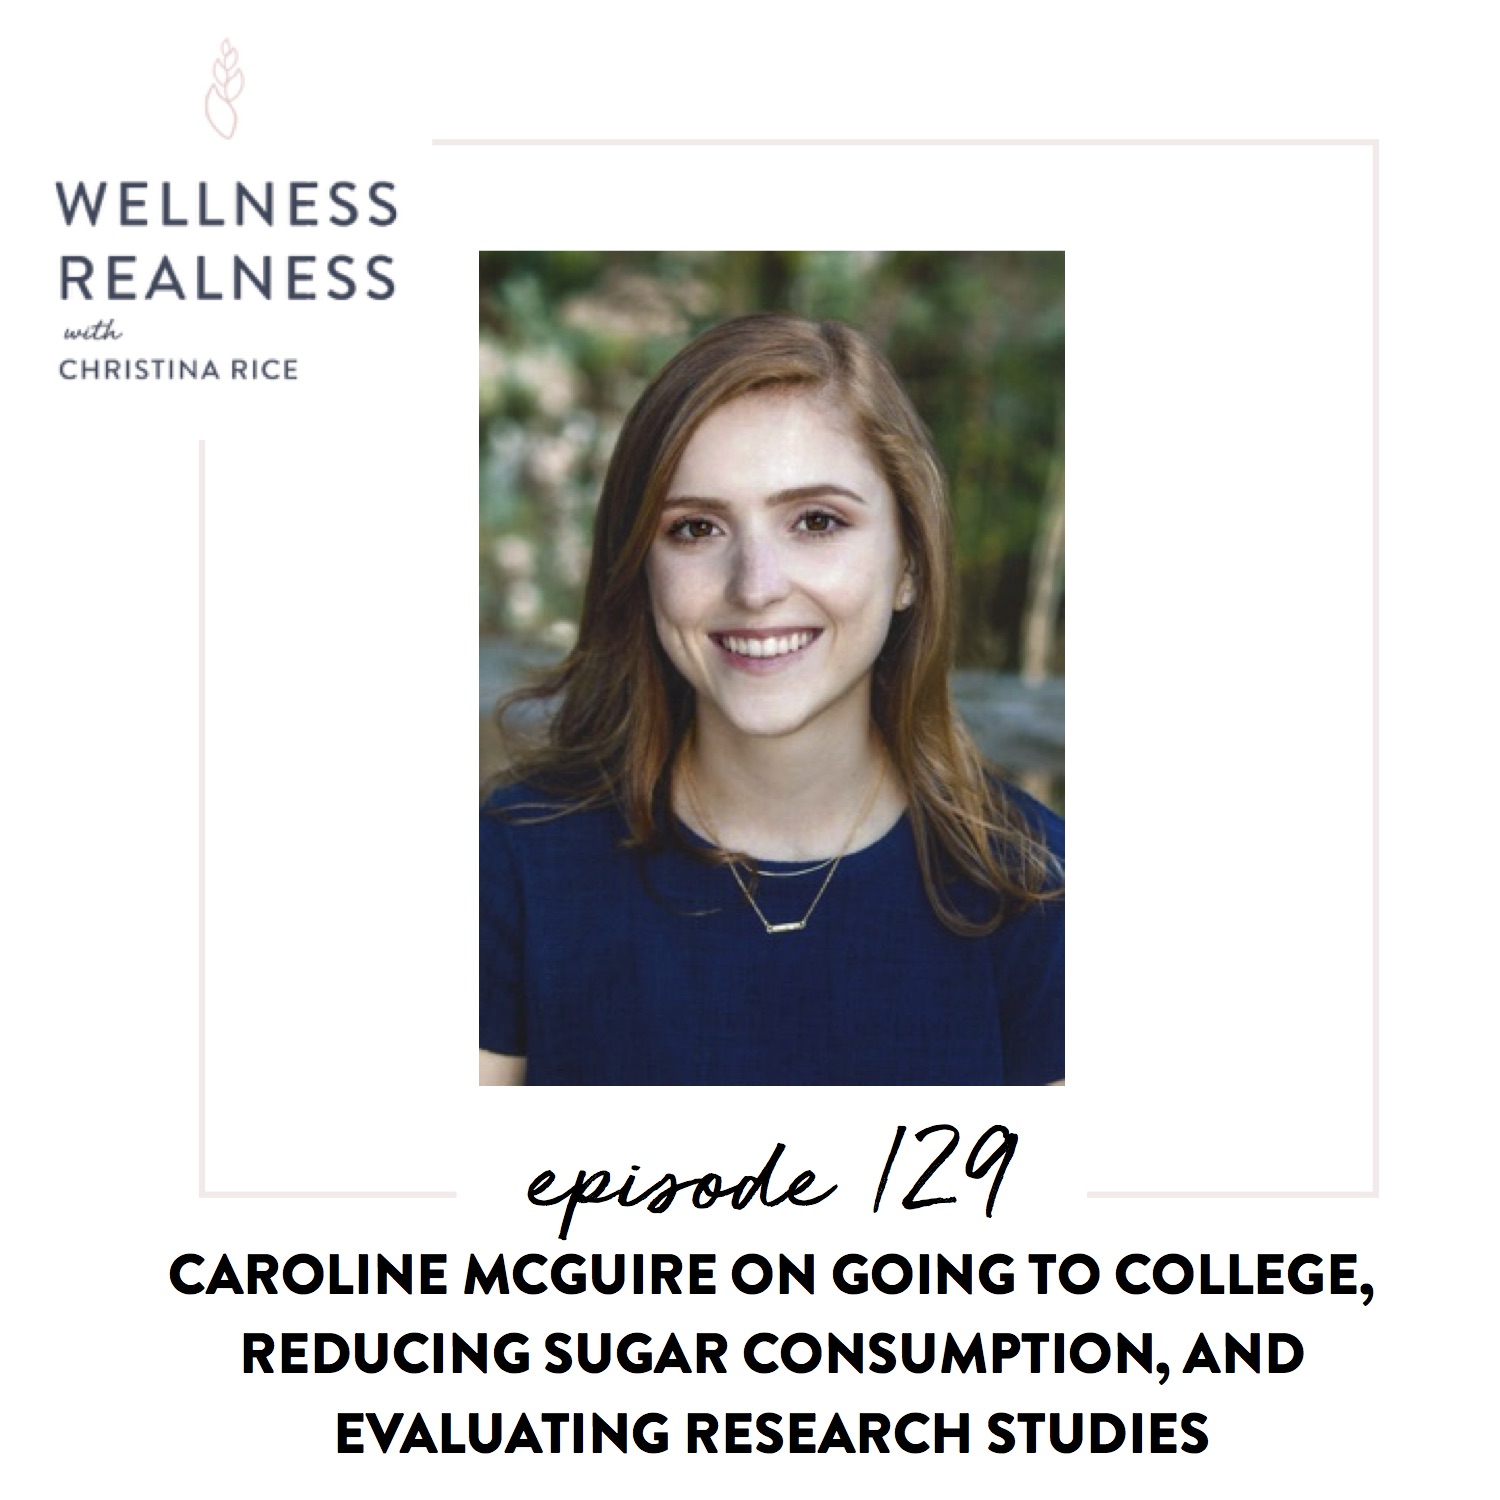 129: Caroline McGuire on Going to College, Reducing Sugar Consumption, and Evaluating Research Studies